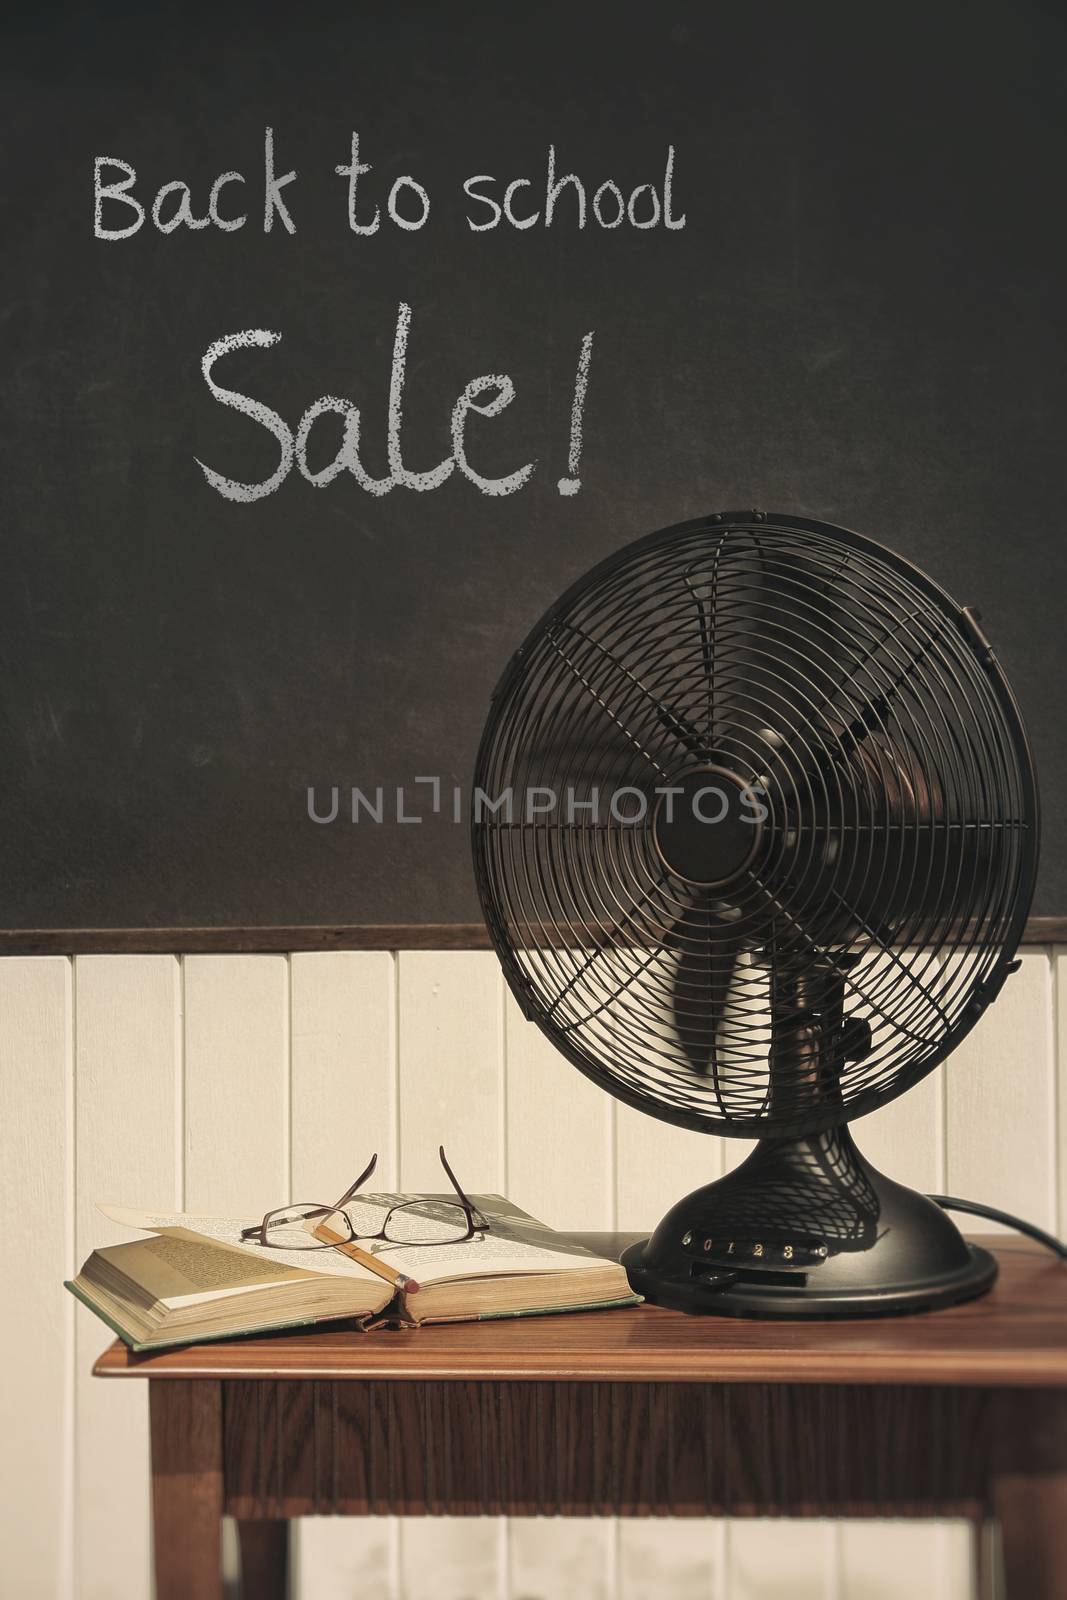 Vintage electric fan on table  by Sandralise